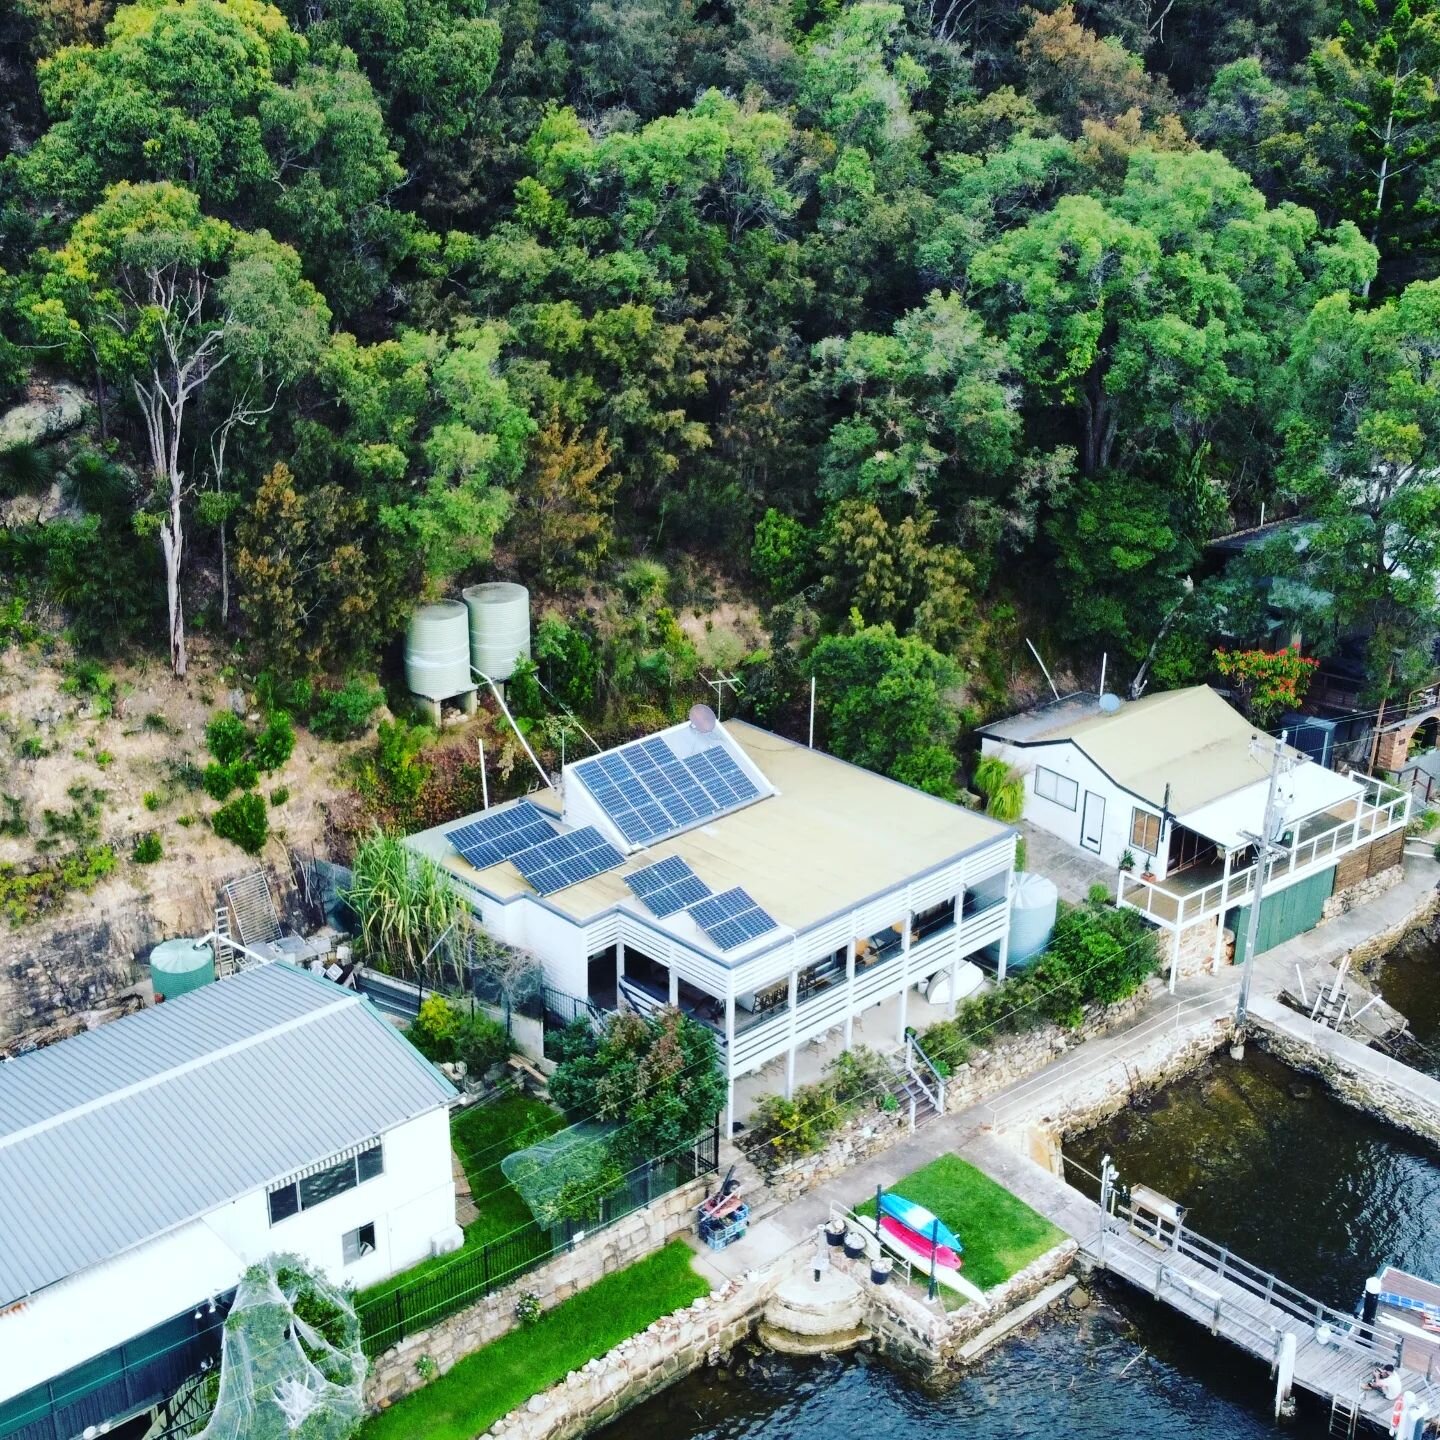 6.66kw solar system on the  Hawkesbury River.

Today we crossed the water to give this airbnb the power of the sun. This took a lot of coordination and planning which the crew delivered on.